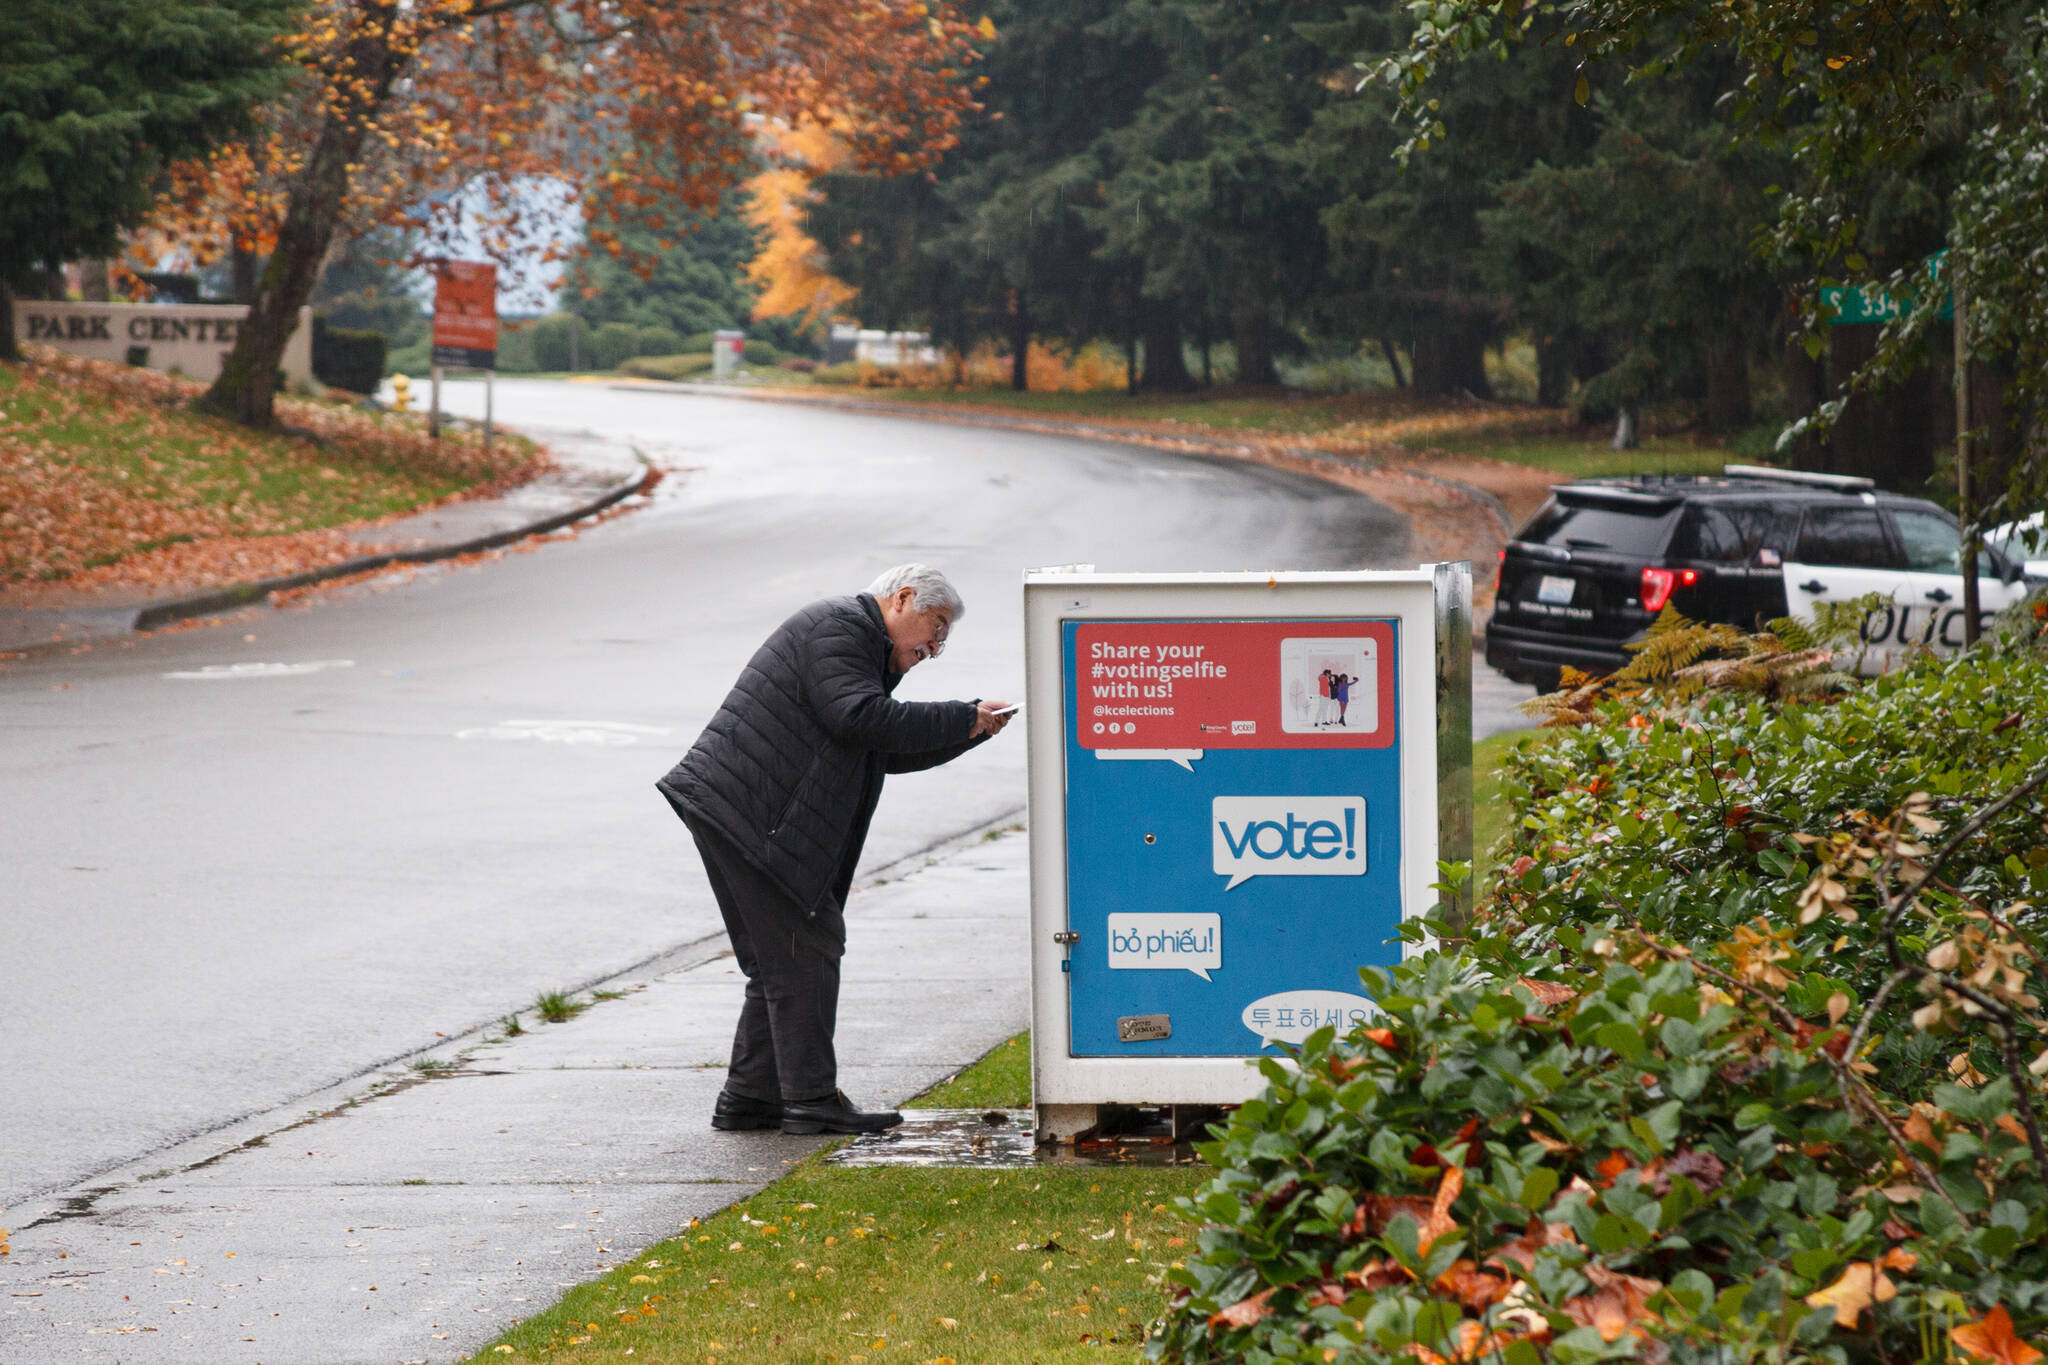 A voter drops off their ballot for the King County general election on Nov. 2, 2021. Photo by Henry Stewart-Wood/Auburn Reporter